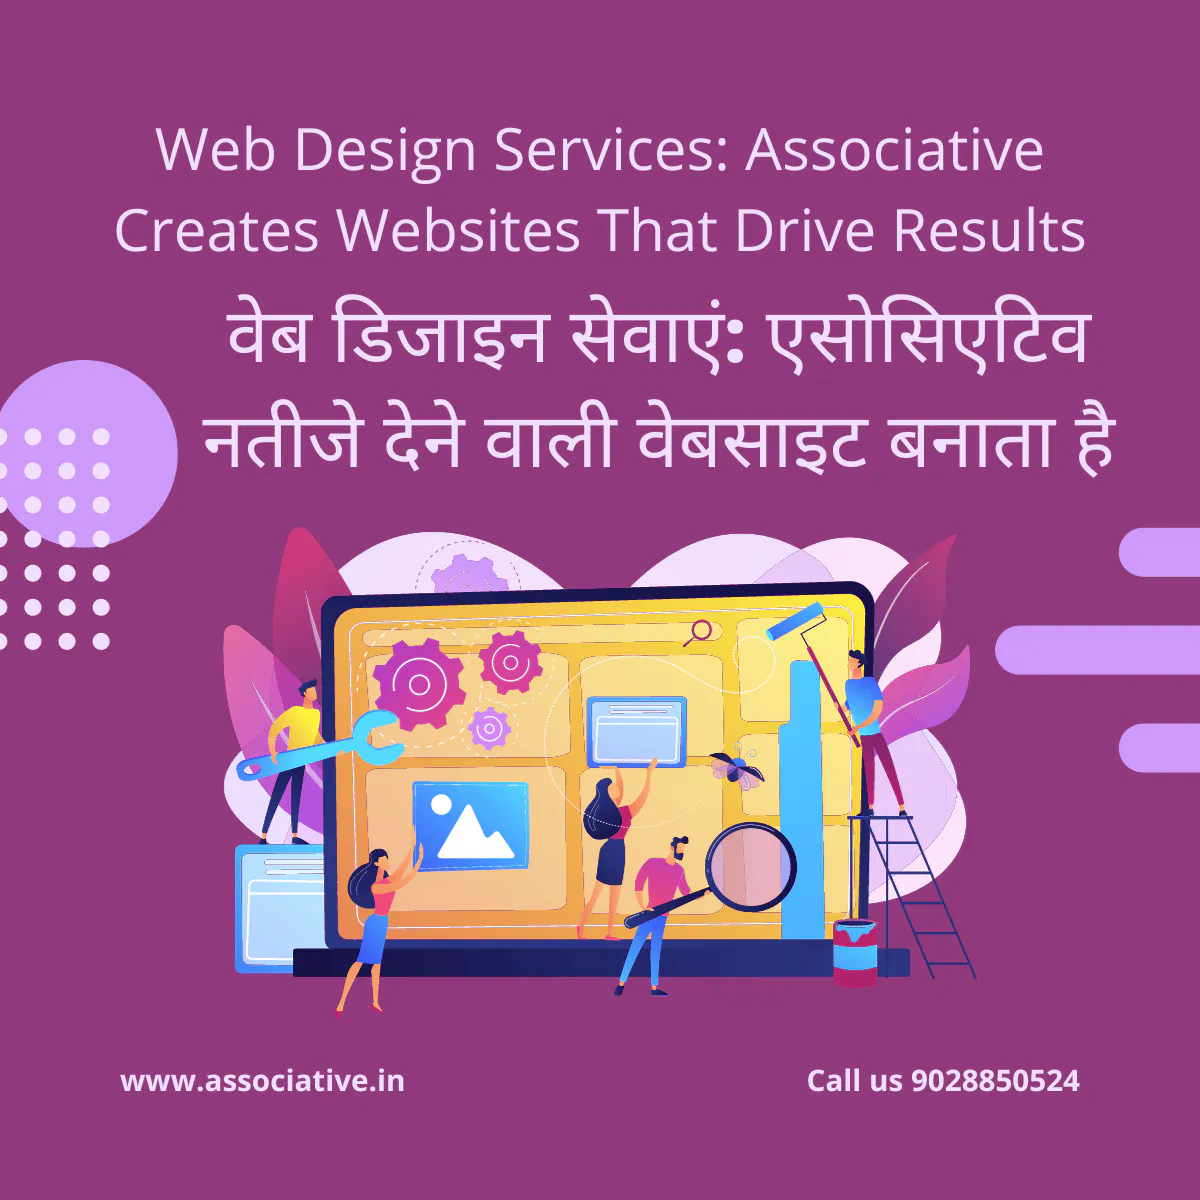 Web Design Services Without Compromising Quality